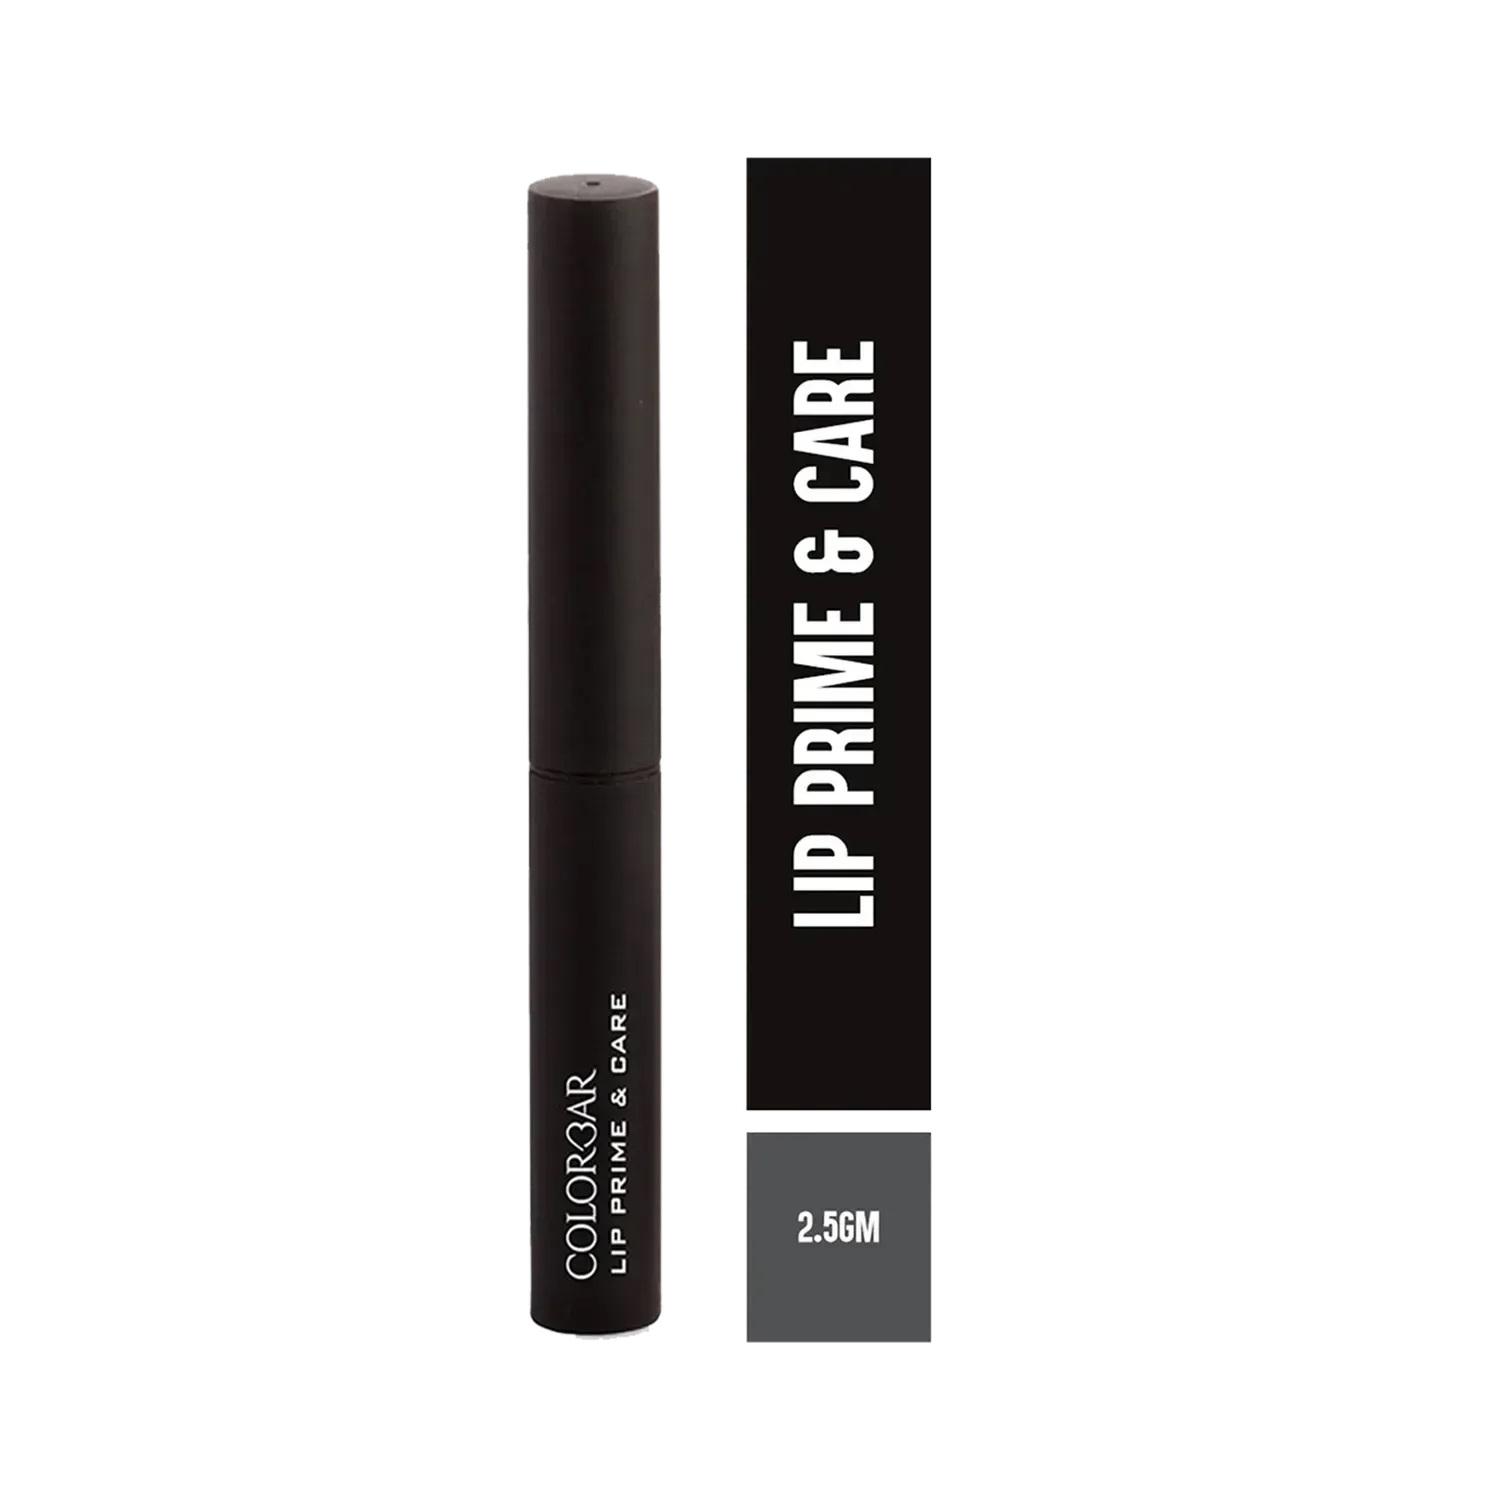 colorbar lip prime and care - clear (2.5g)